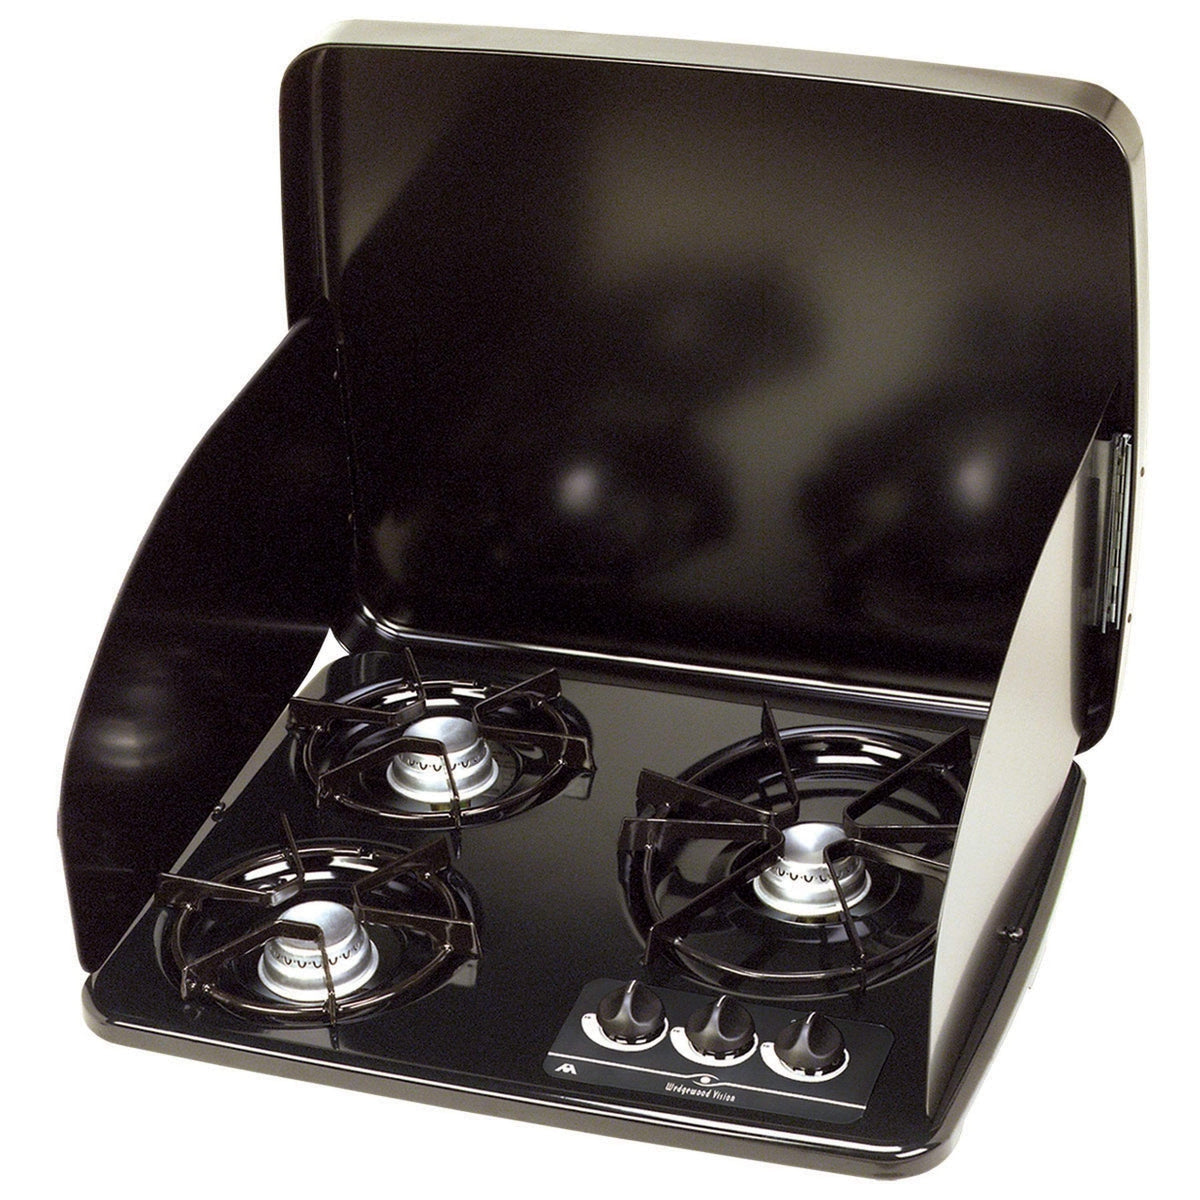 Atwood Mobile Products Qualifies for Free Shipping Atwood 3 Burner Cooktop Cover SS #56461